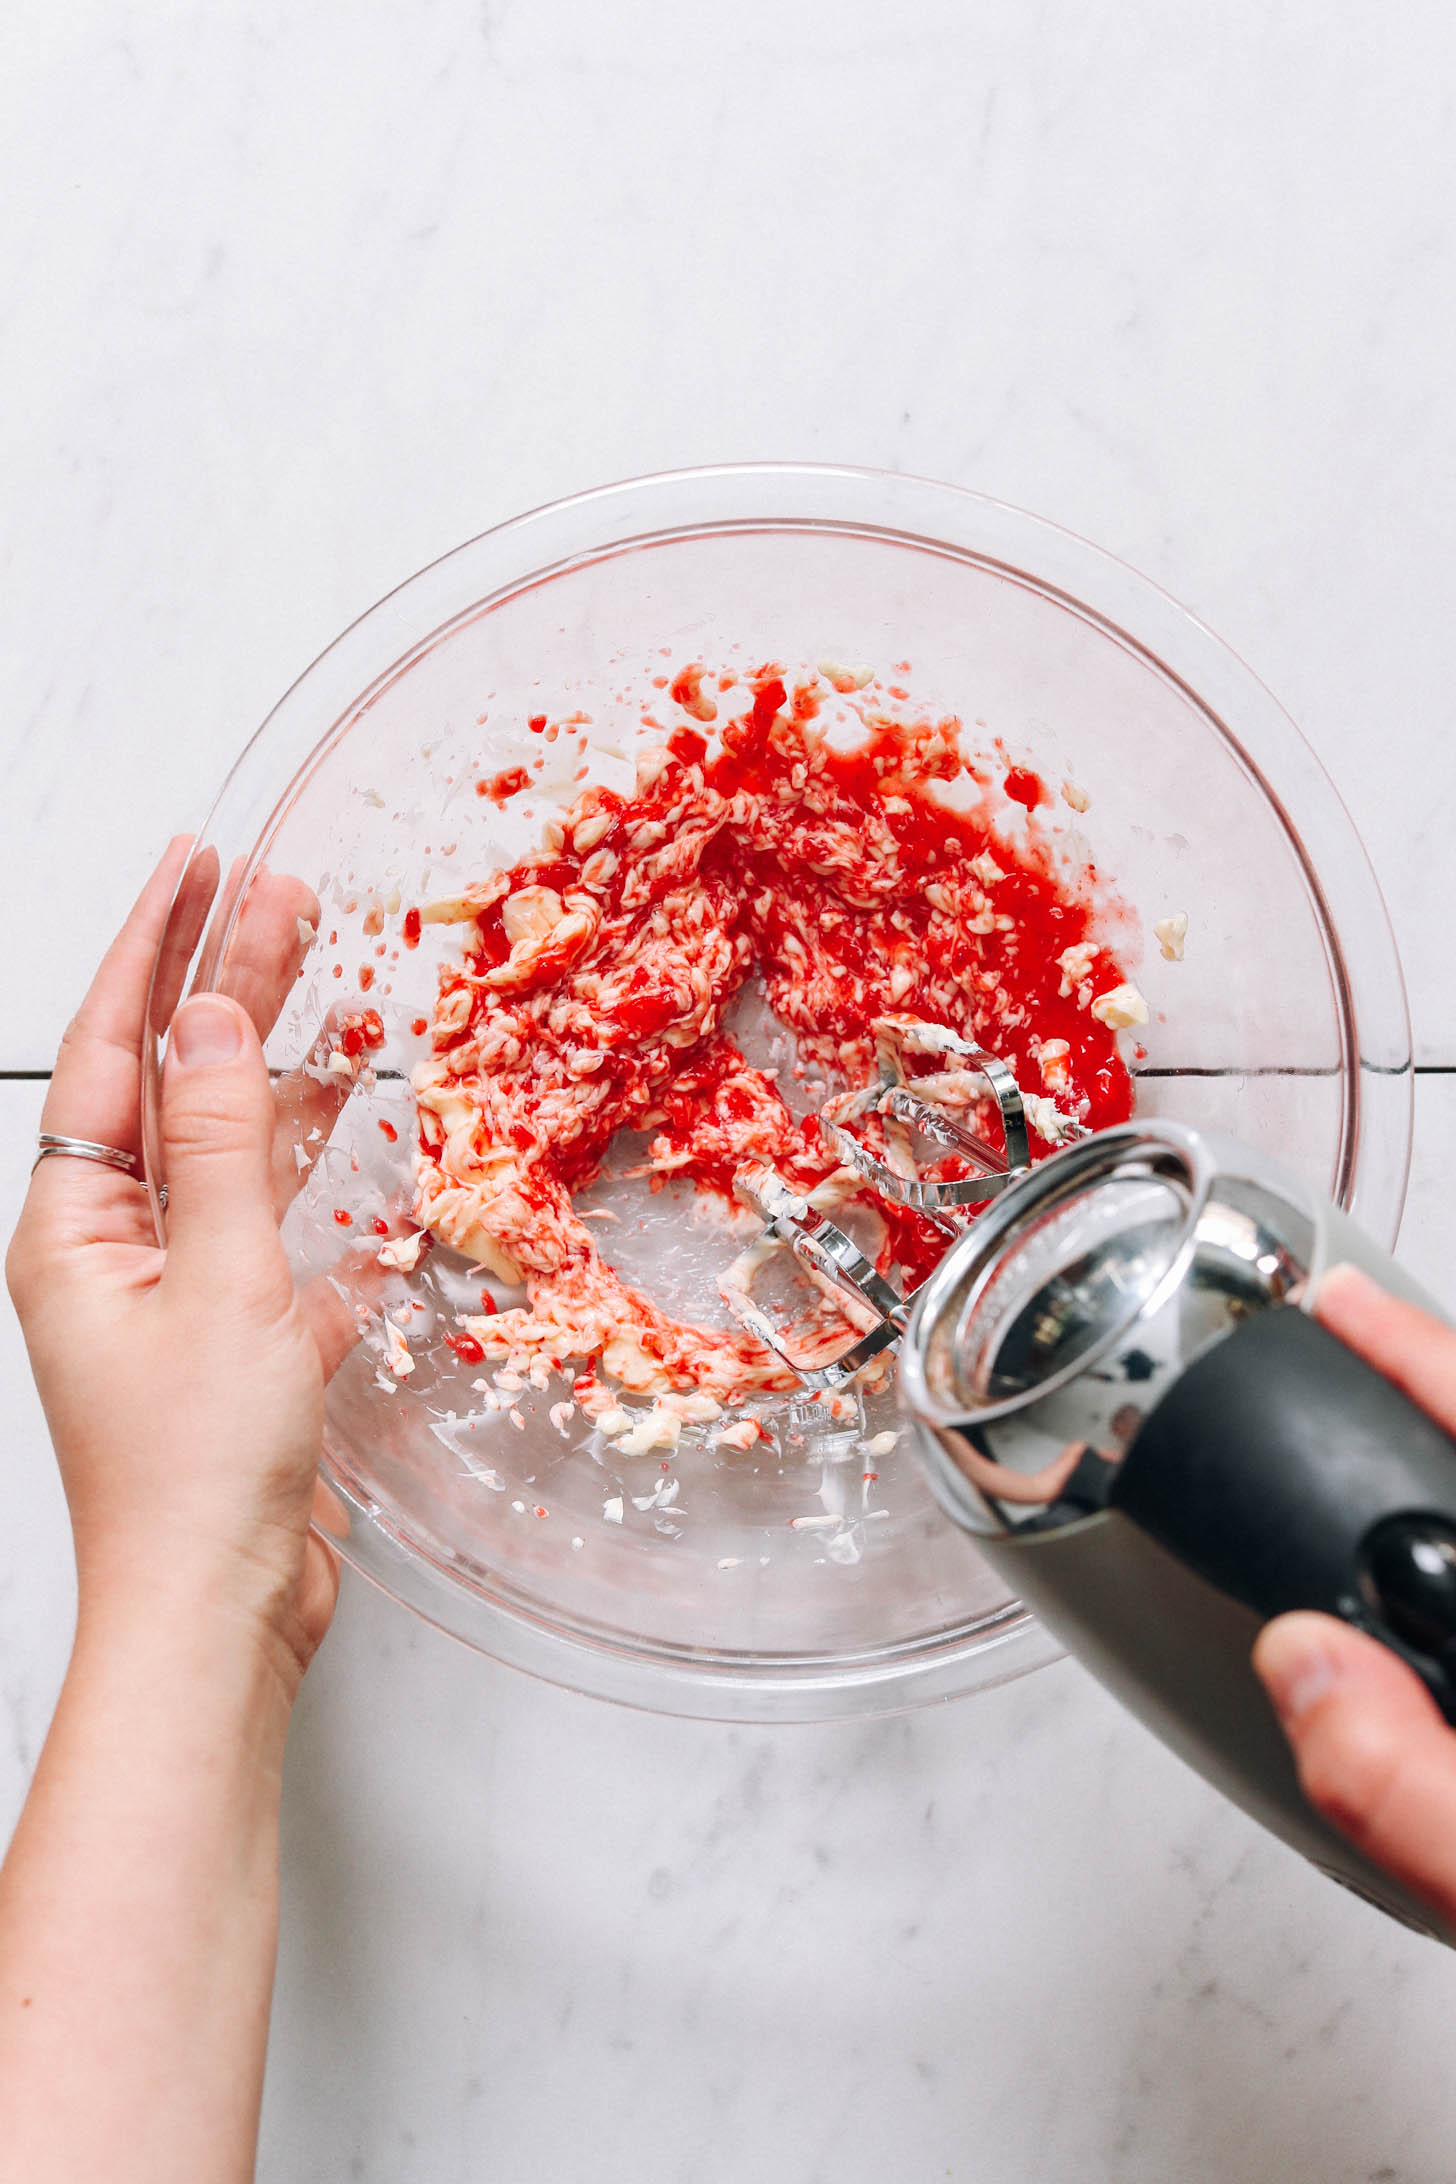 Using a hand mixer to combine strawberry purée and vegan butter